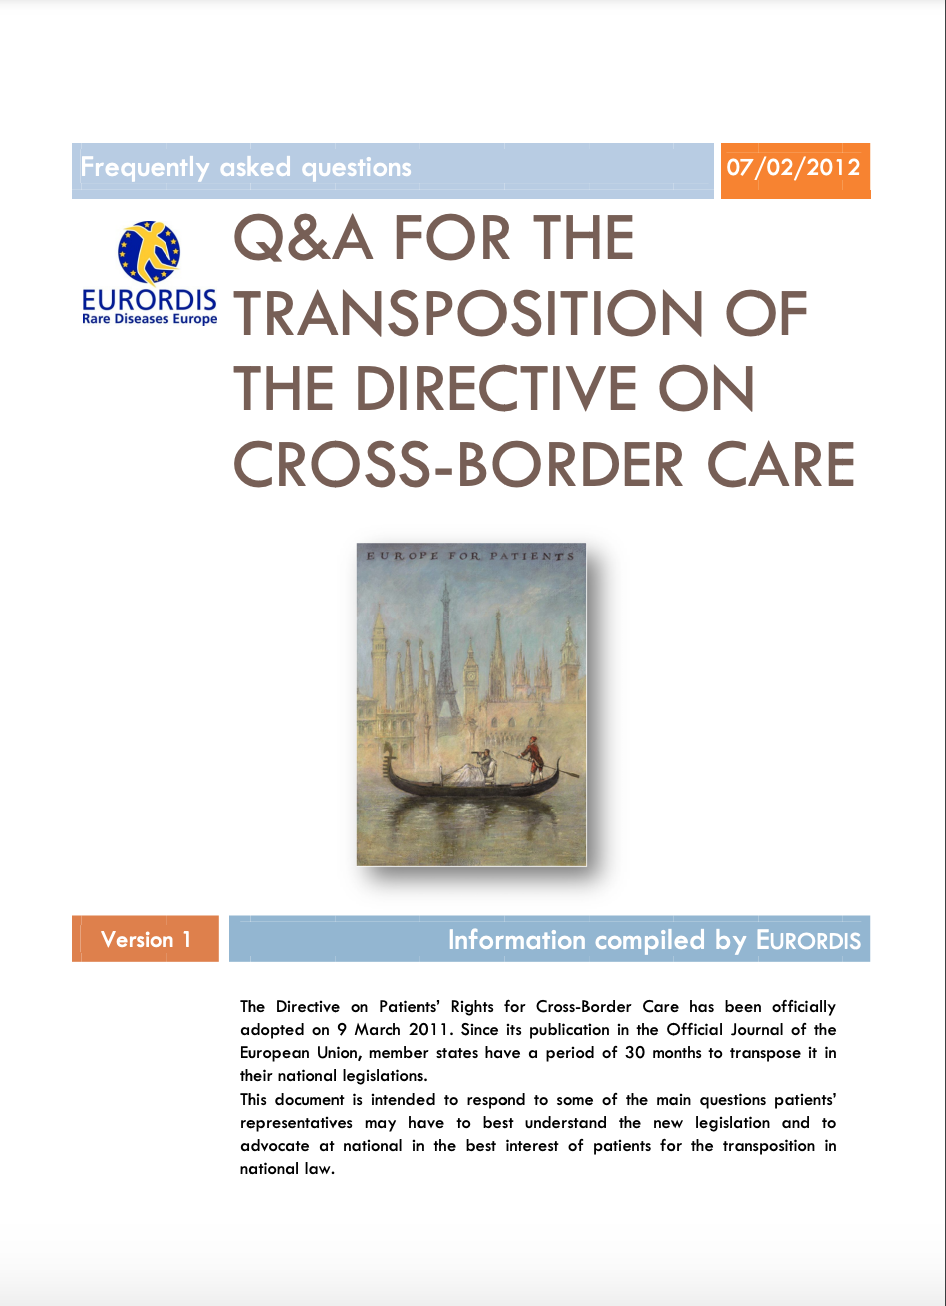 Q&A for the transposition of the Directive on Cross-Border Care